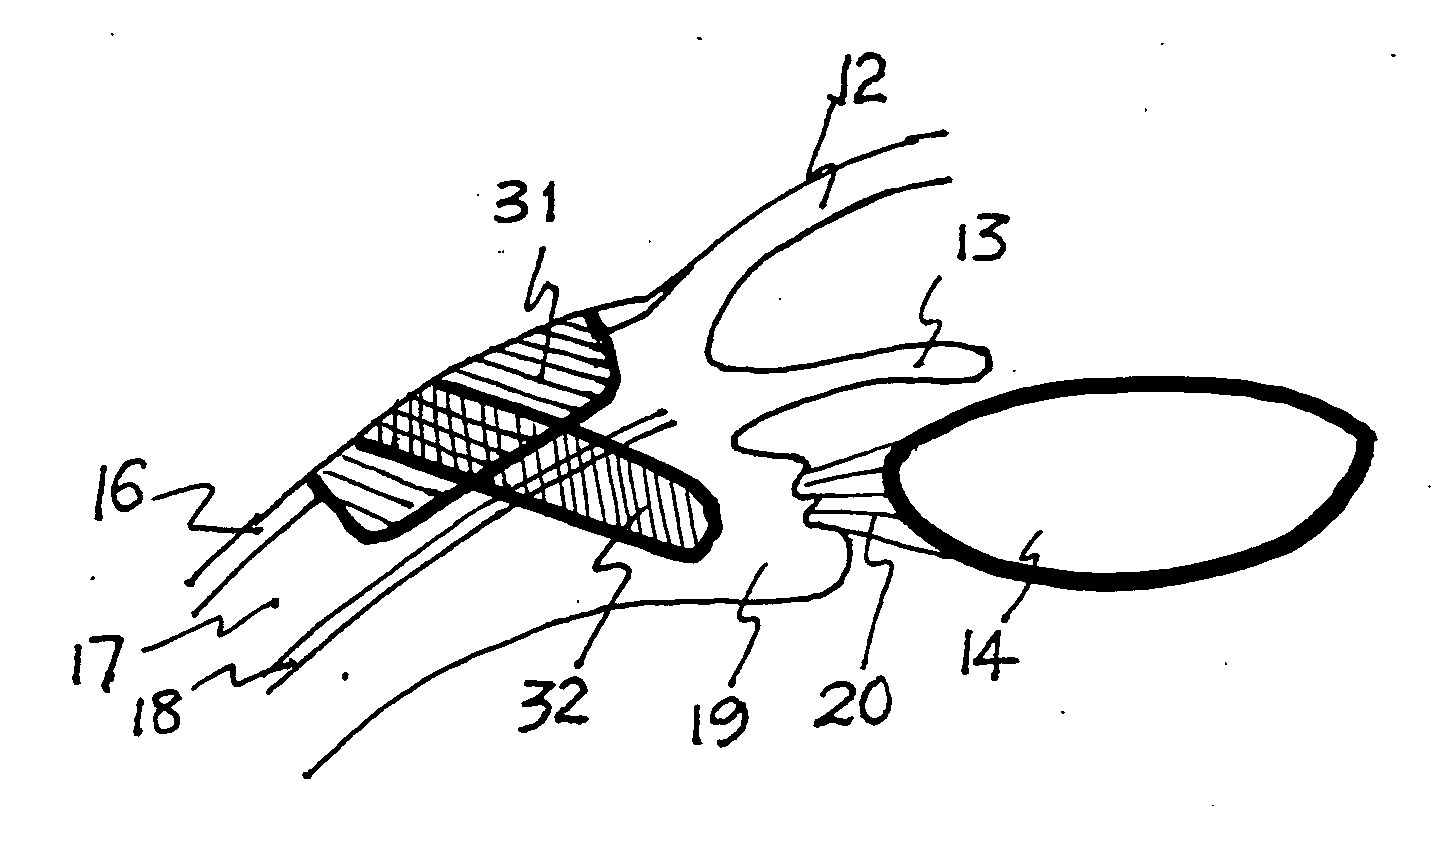 Method and apparatus for the treatment of presbyopia and glaucoma by ciliary body ablation